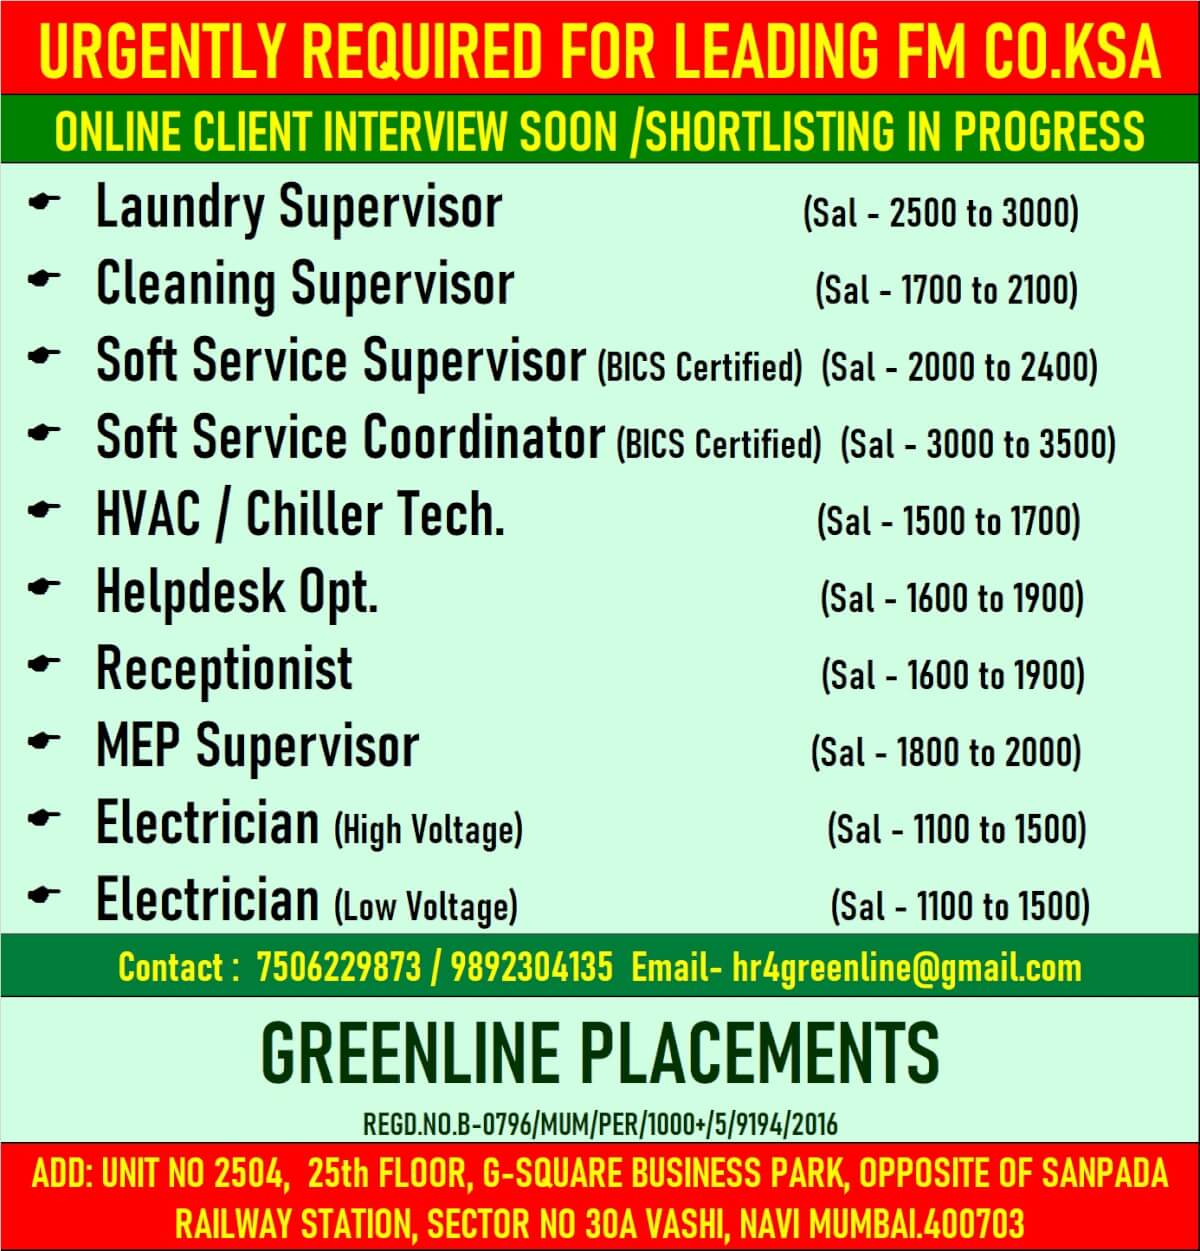 URGENTLY REQUIRED FOR LEADING FM CO.KSA